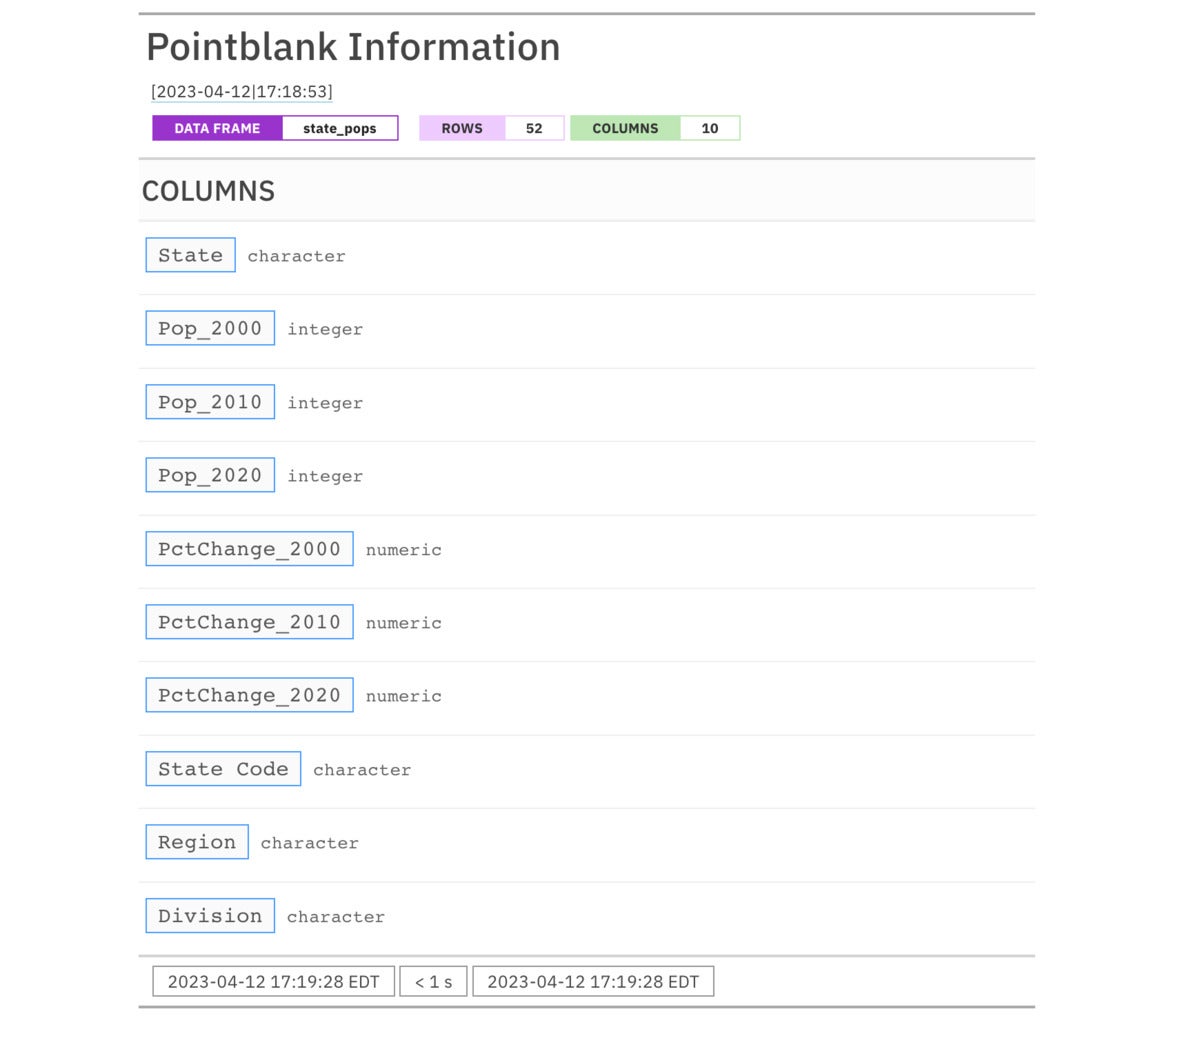 Pointblank Information report showing name of each column and its data type